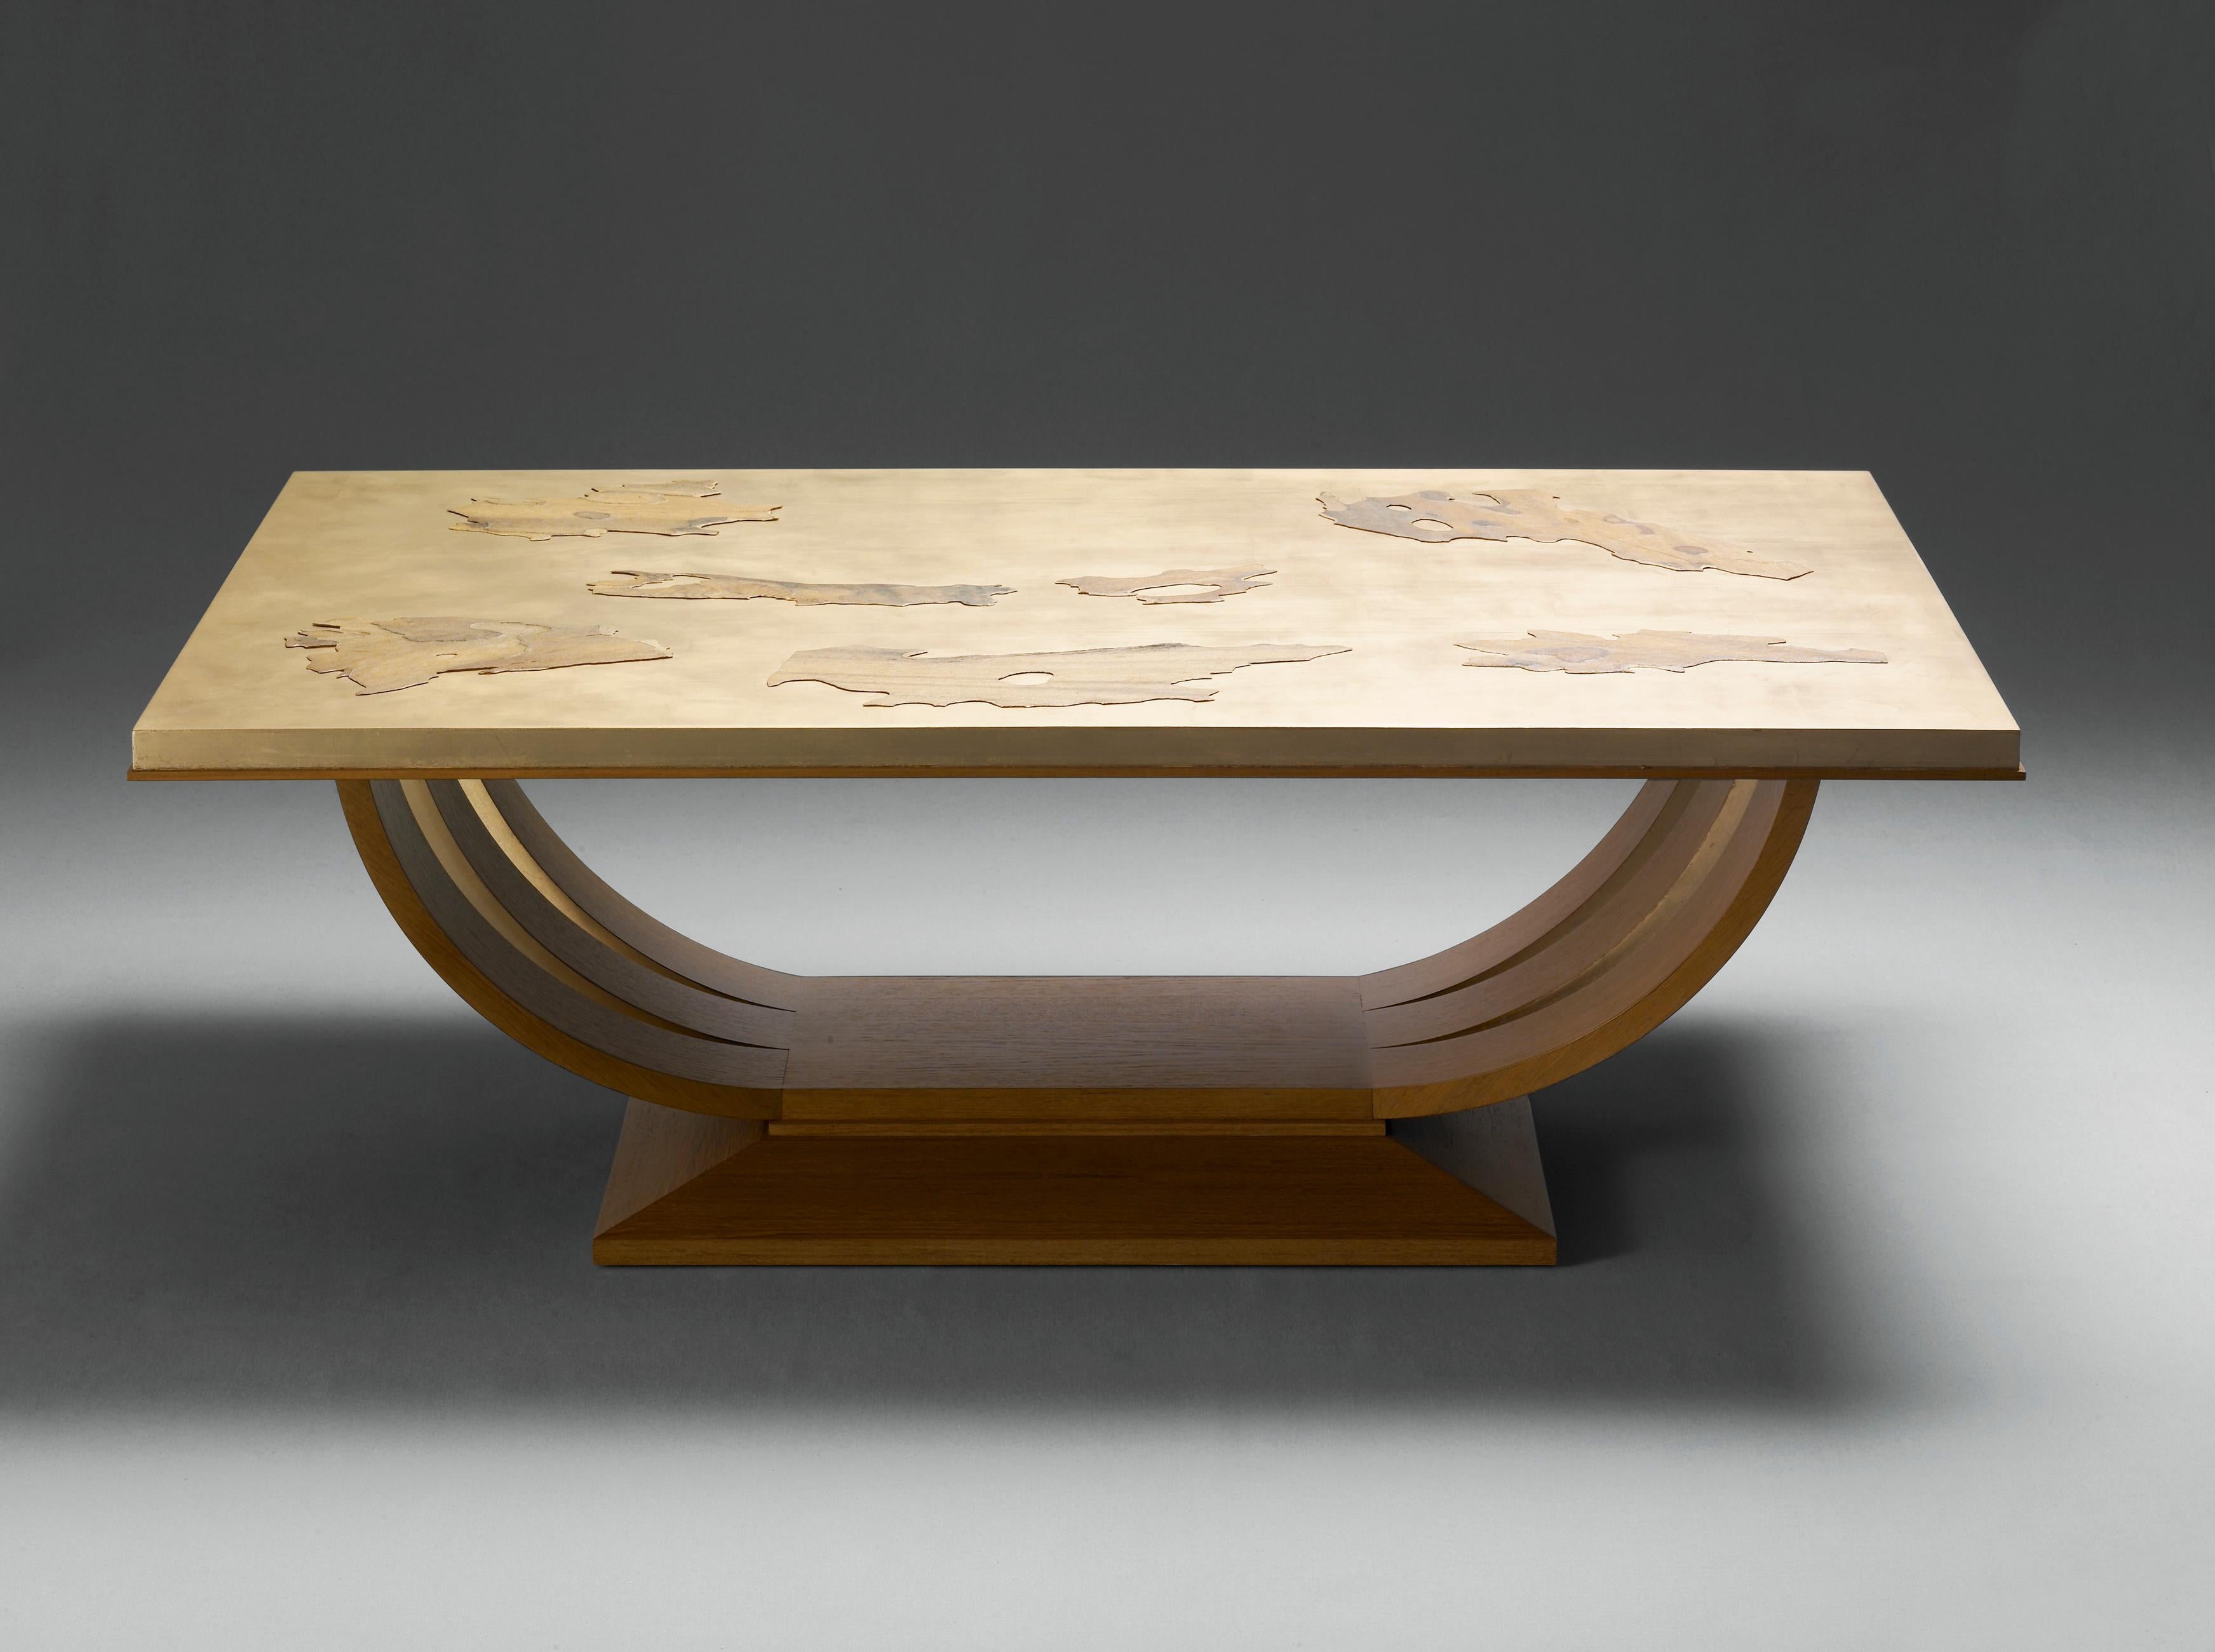 Clouds is a coffee table inspired by a classical style. The top is covered with gold leaf and an inlay made with plane tree bark. The bark was cut into several cloud-shaped pieces that give the table its name. The legs are formed by six semicircular